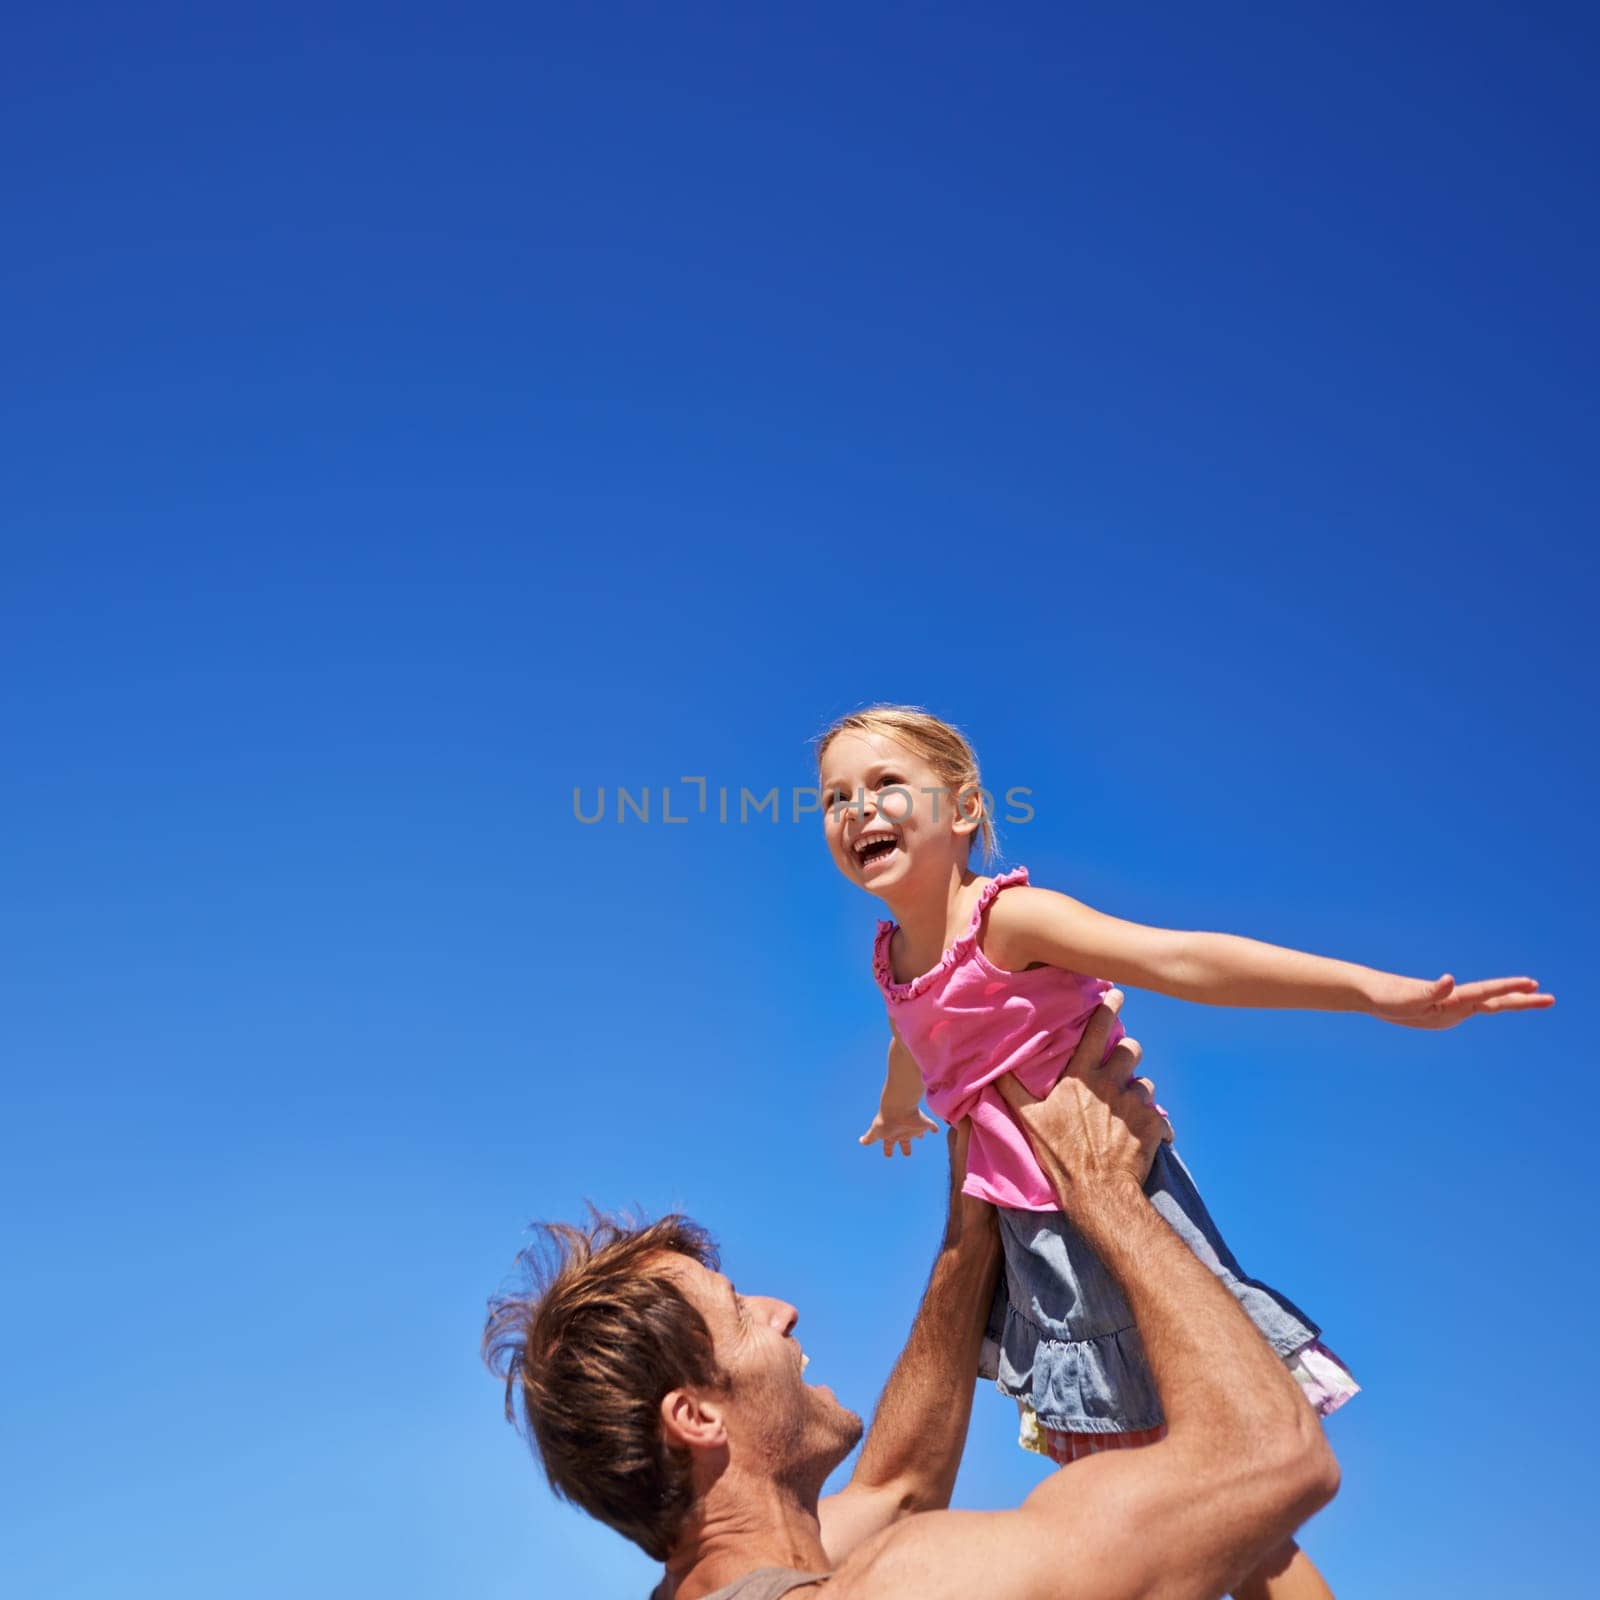 Fly, father and girl with fun, playing and happiness with family, sky background and smile. Outdoor, nature and dad carrying daughter with wellness and weekend break with summer, freedom and energy.